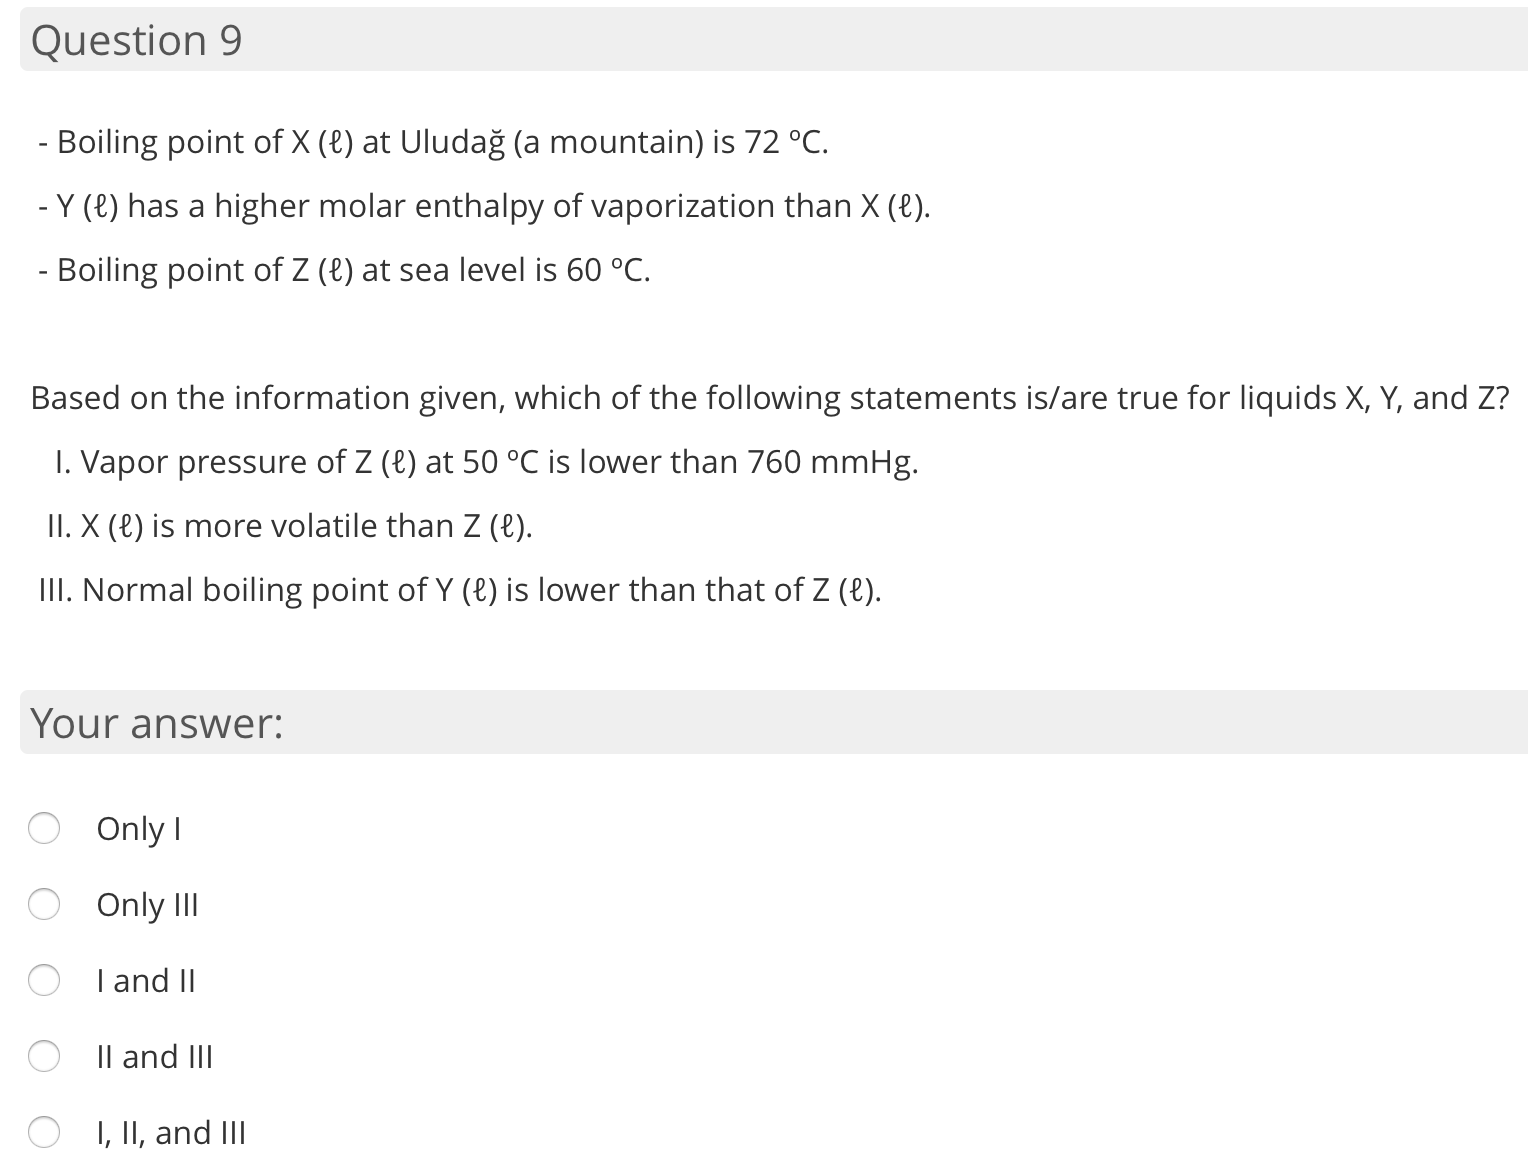 - Boiling point of X (8) at Uludağ (a mountain) is 72 °C.
- Y (8) has a higher molar enthalpy of vaporization than X (8).
- Boiling point of Z (8) at sea level is 60 °C.
Based on the information given, which of the following statements is/are true for liquids X, Y, and Z?
I. Vapor pressure of Z (e) at 50 °C is lower than 760 mmHg.
II. X (€) is more volatile than Z (e).
III. Normal boiling point of Y (8) is lower than that of Z (8).
Your answer:
O Only I
O Only III
I and II
Il and III
I, II, and III
